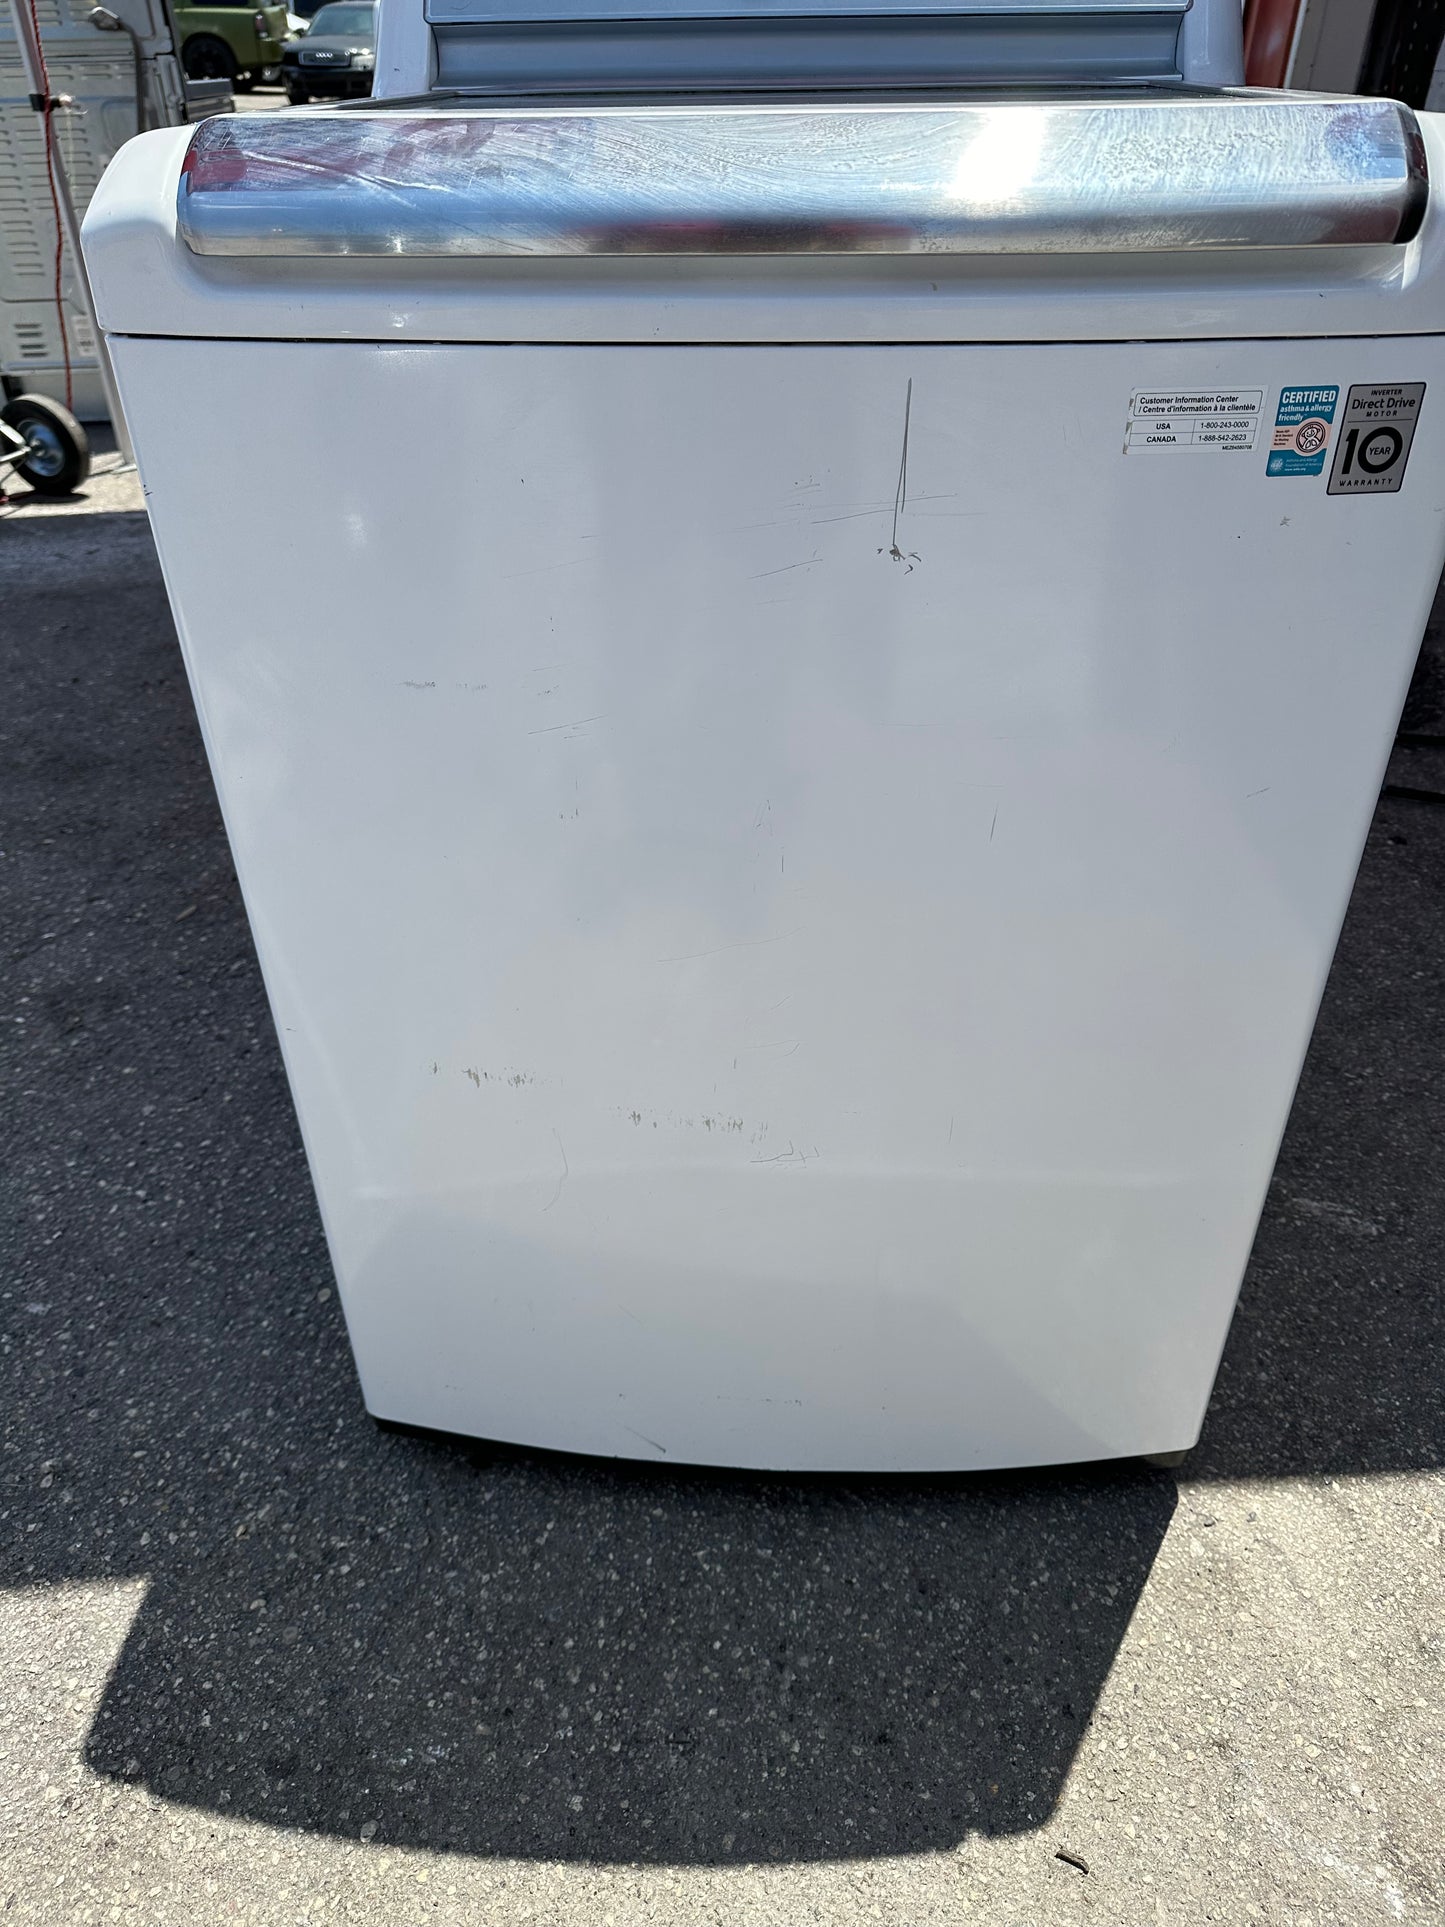 Lg Washer - White - 27 Inch 5.2 cu. ft. Top Load Washer with Steam